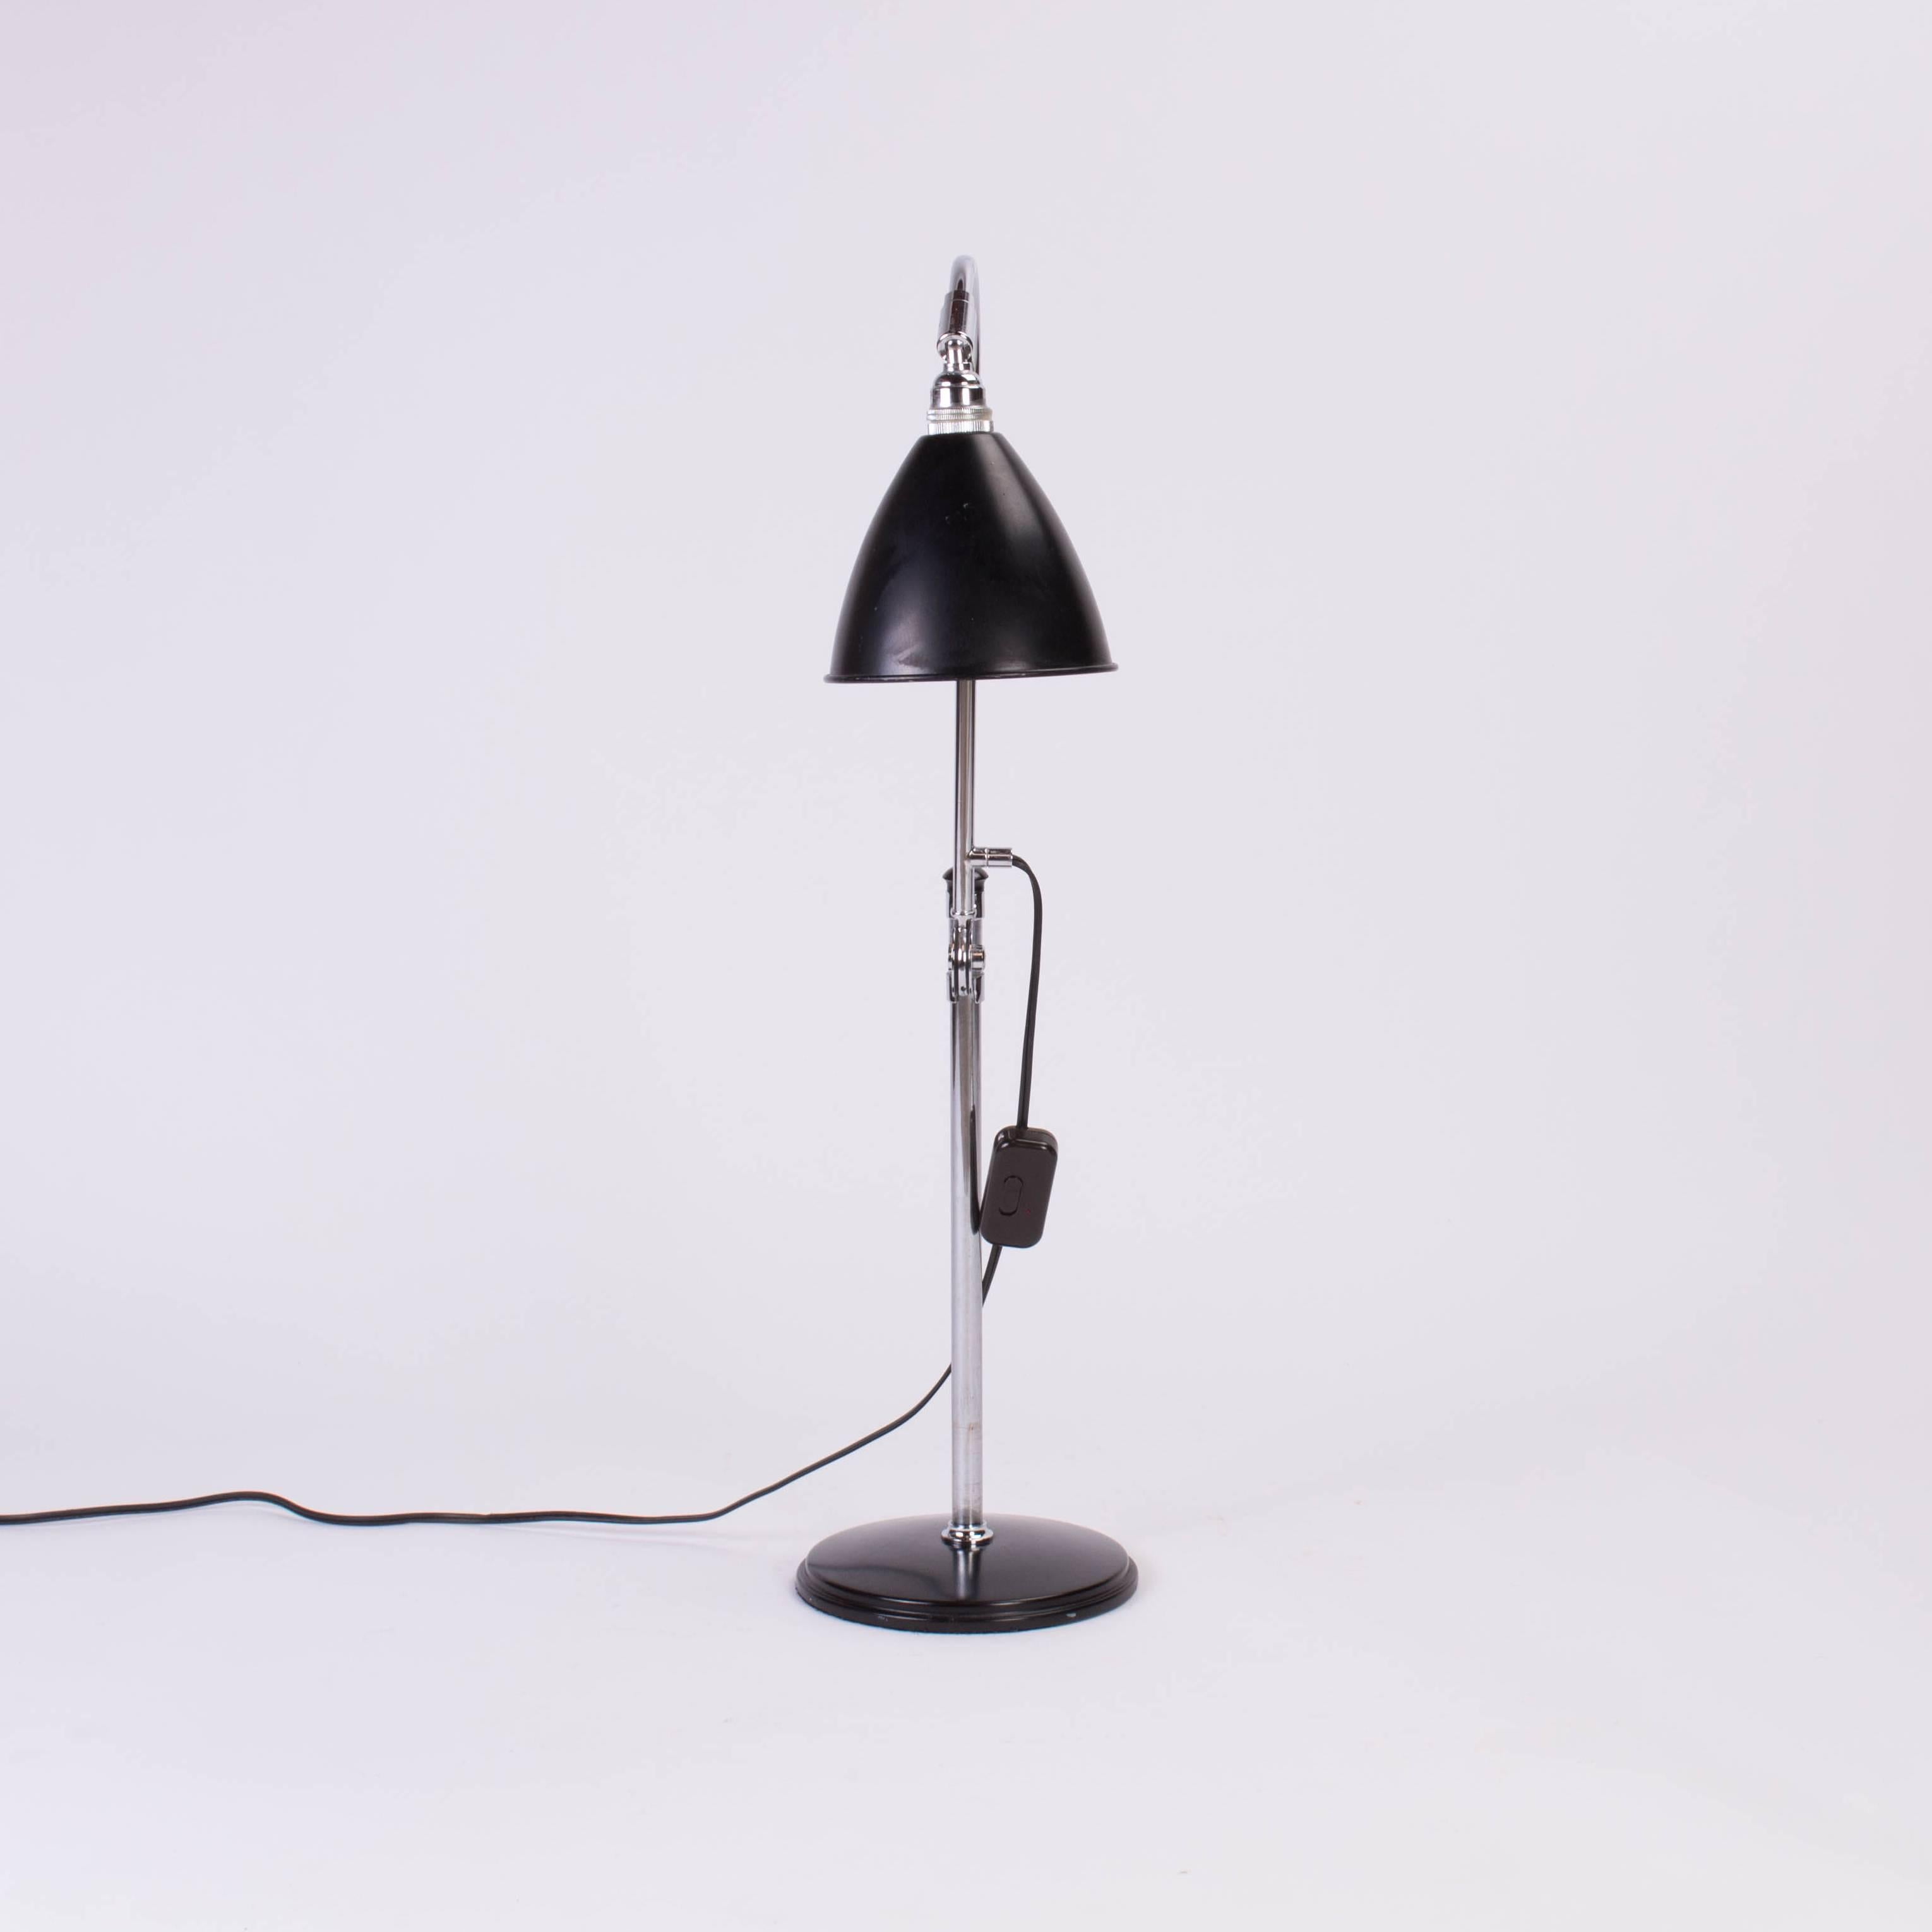 Industrial style desk lamp with adjustable height in chrome and lacquered metal.

Base 8 inches, low height 19.75 inches, tallest height 32.5 inches.